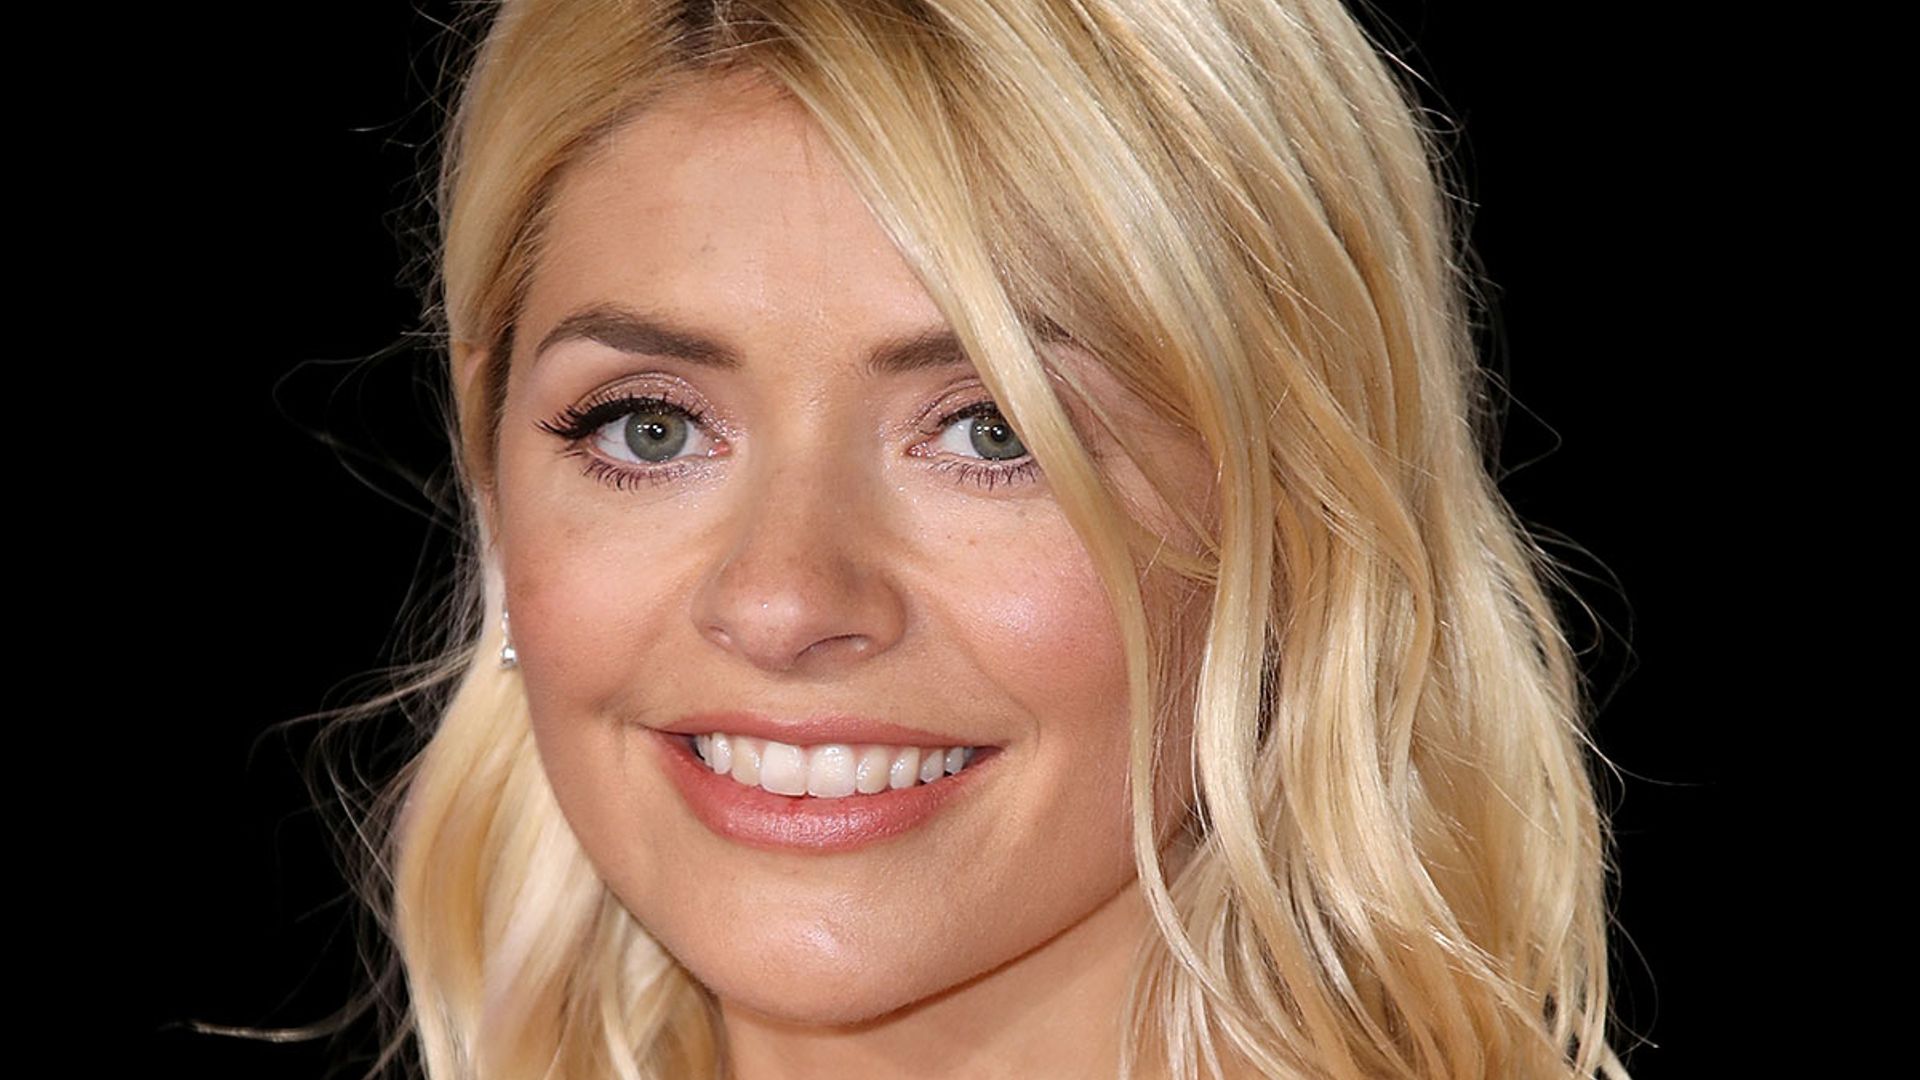 Holly Willoughby's new Marks & Spencer dress is sending fans wild